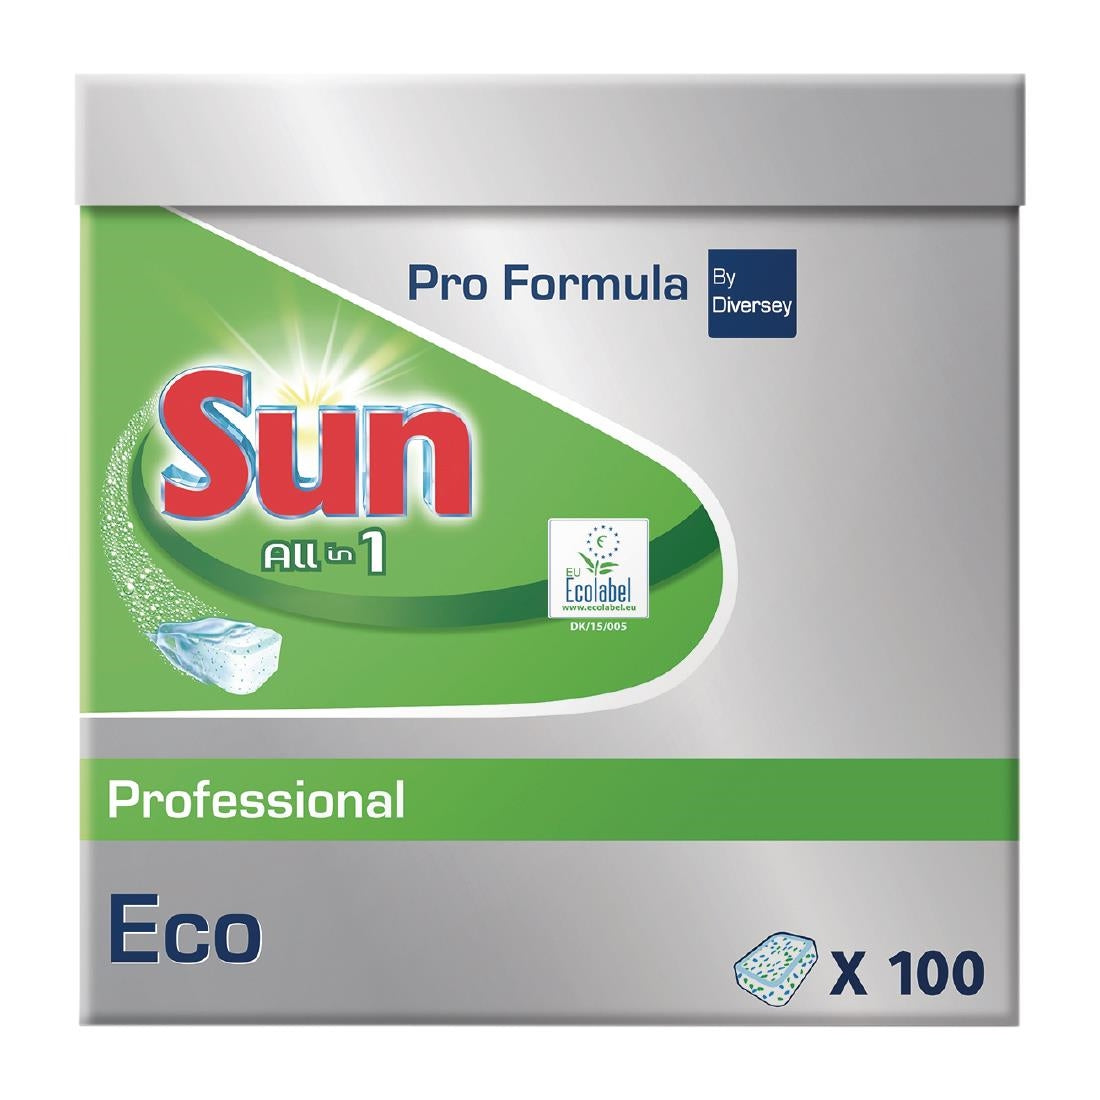 Sun Pro Formula All-in-One Eco Dishwasher Tablets (Pack of 100)